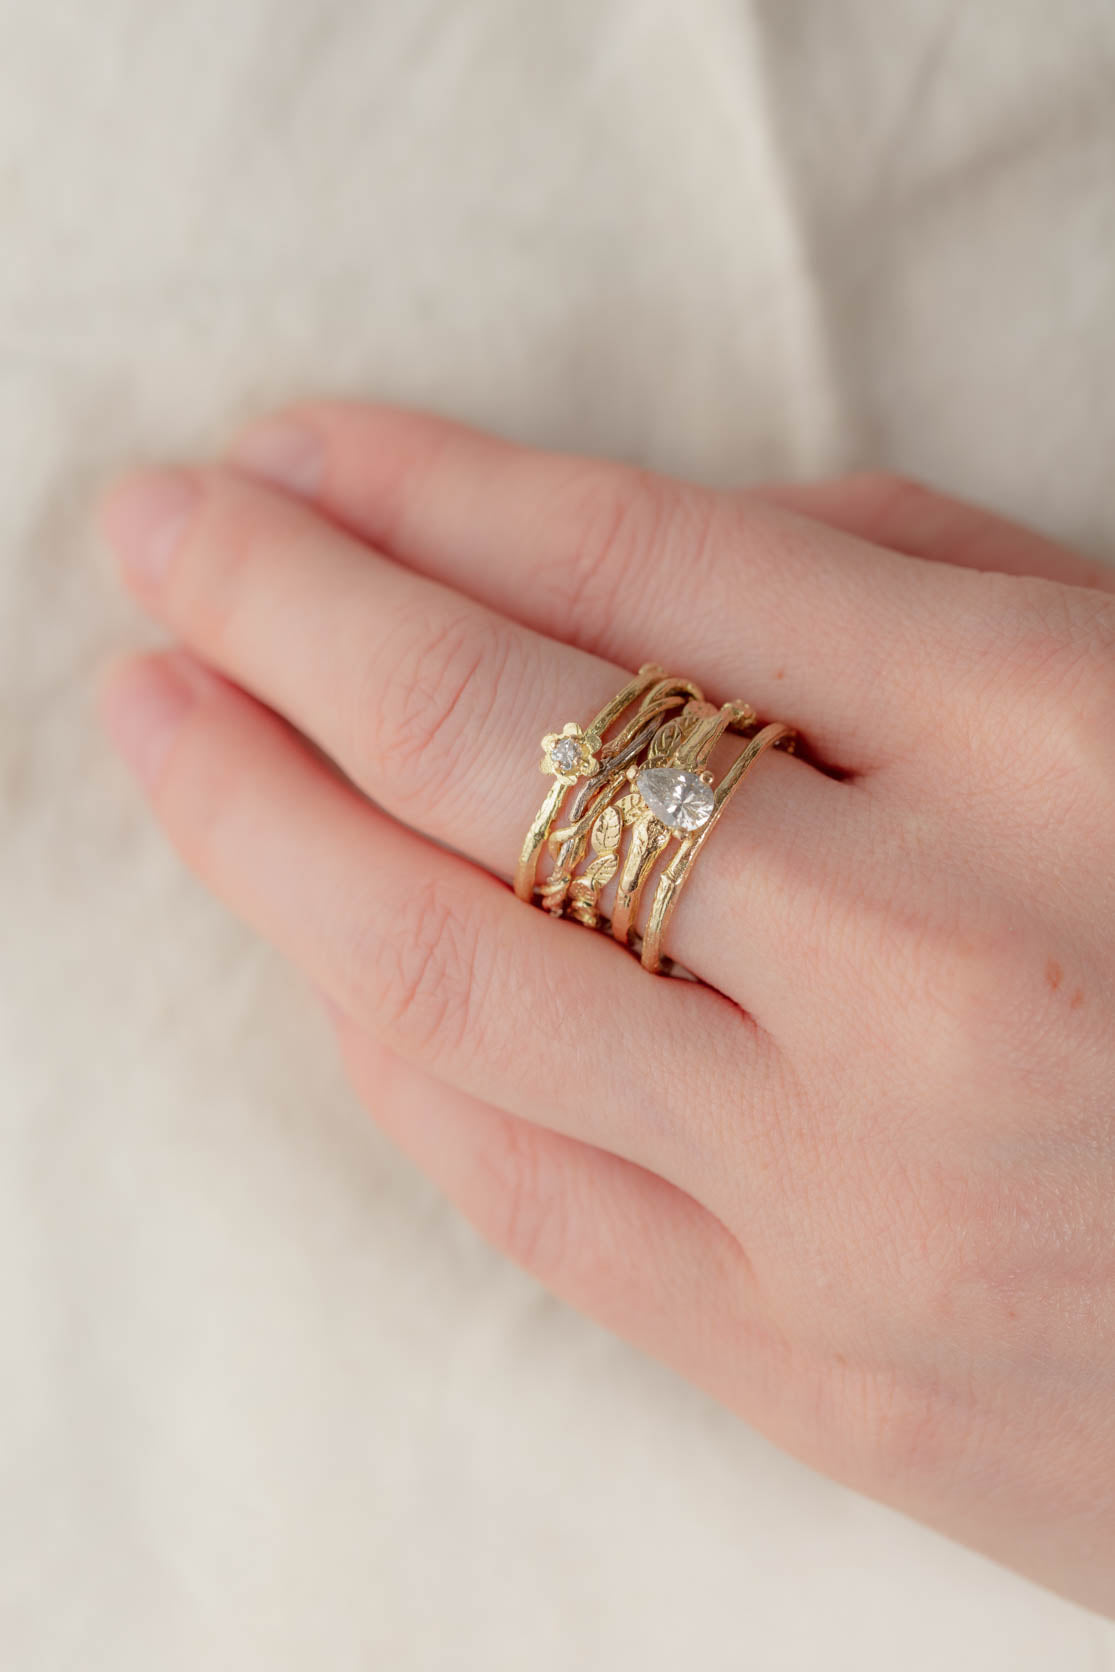 Our nature-inspired alternative wedding and engagement rings stacked on a finger. A delightful contrast of organic textures. 